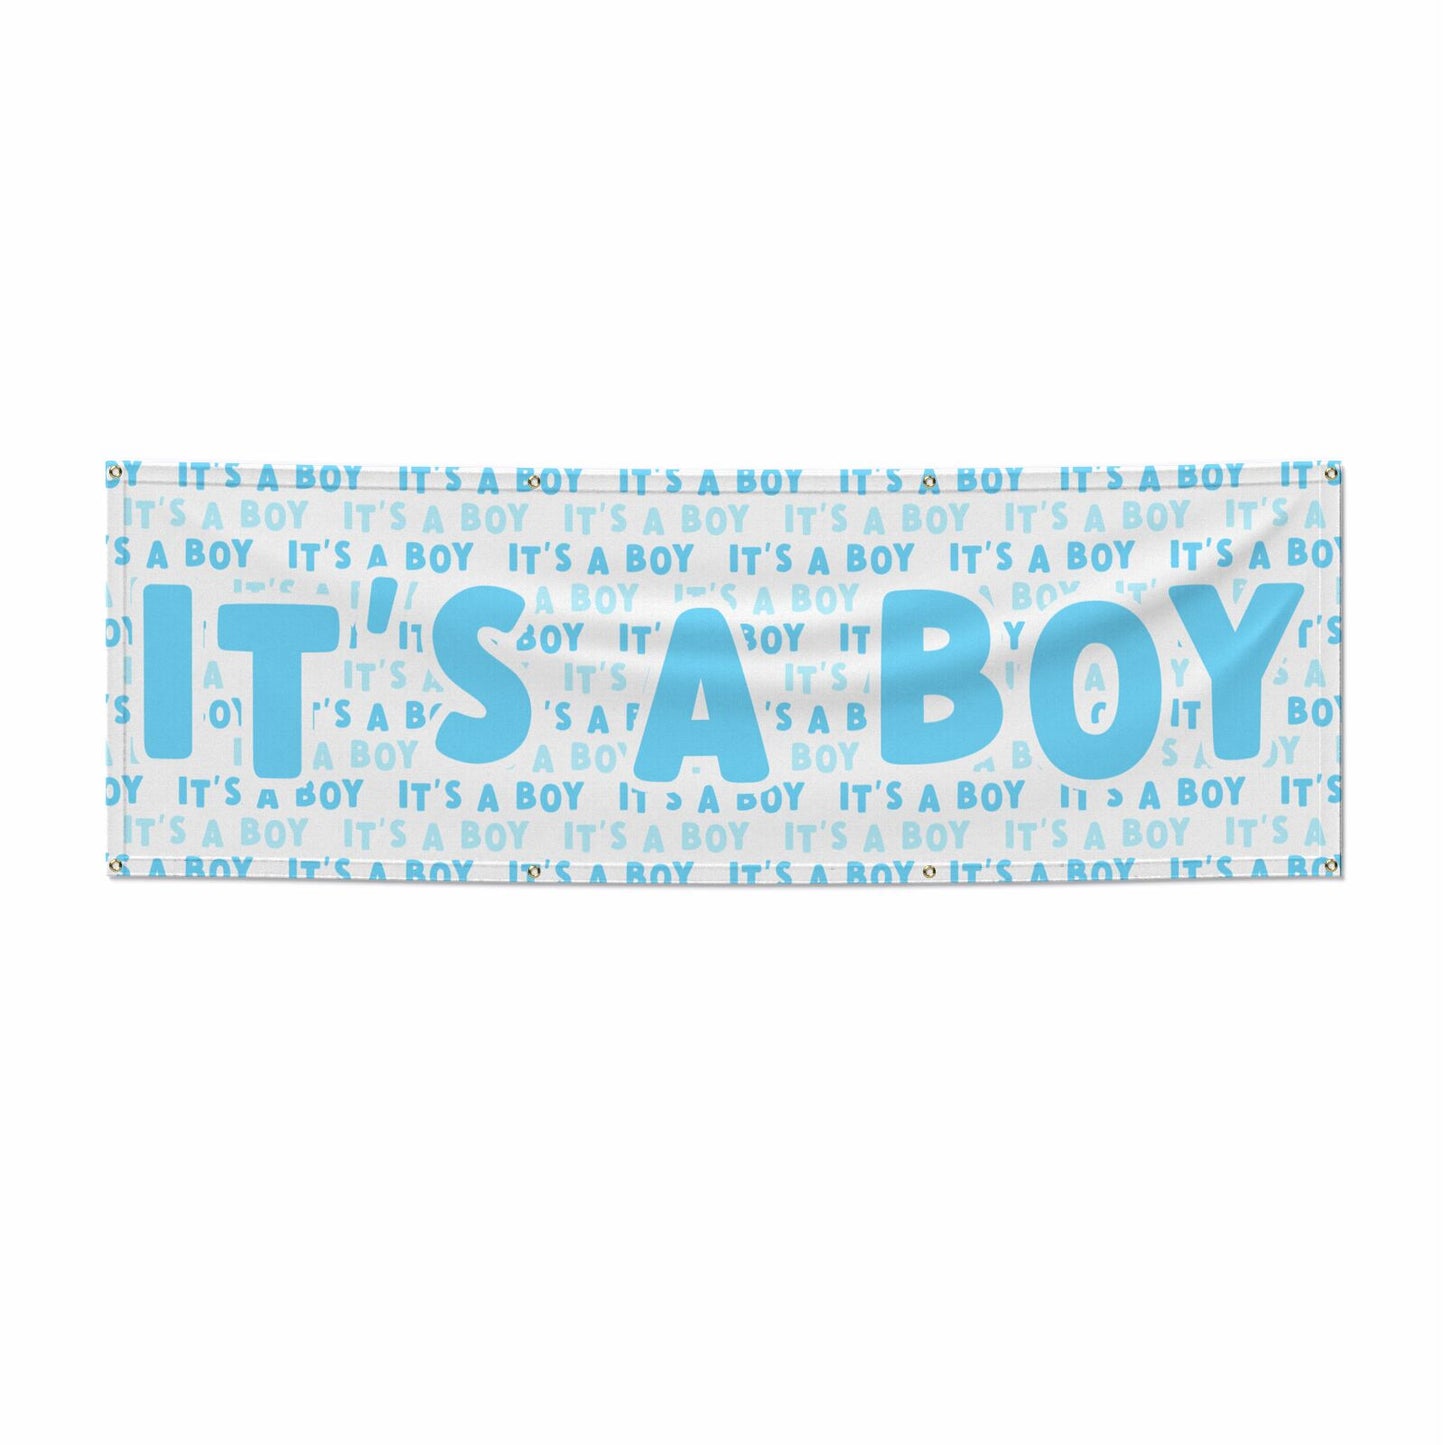 Its a Boy Baby Shower 6x2 Vinly Banner with Grommets